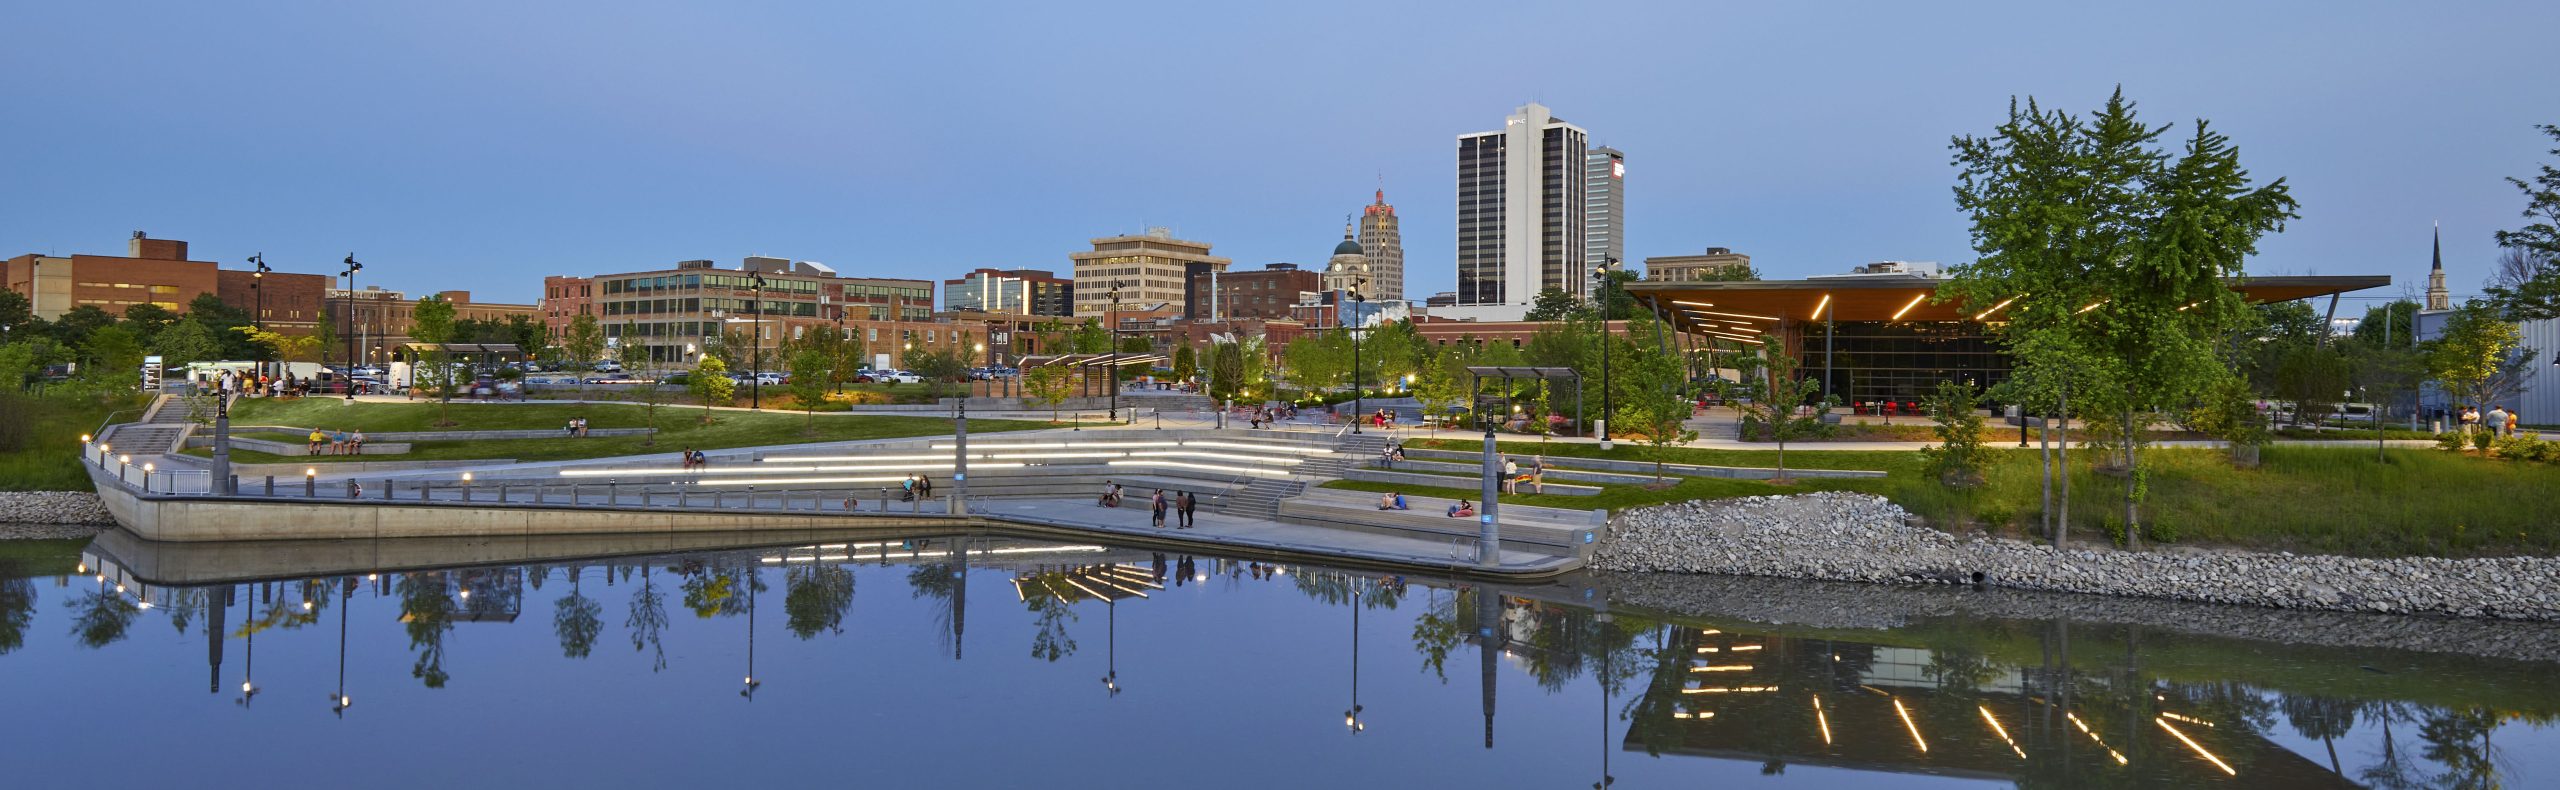 Promenade Park at Dusk from the River